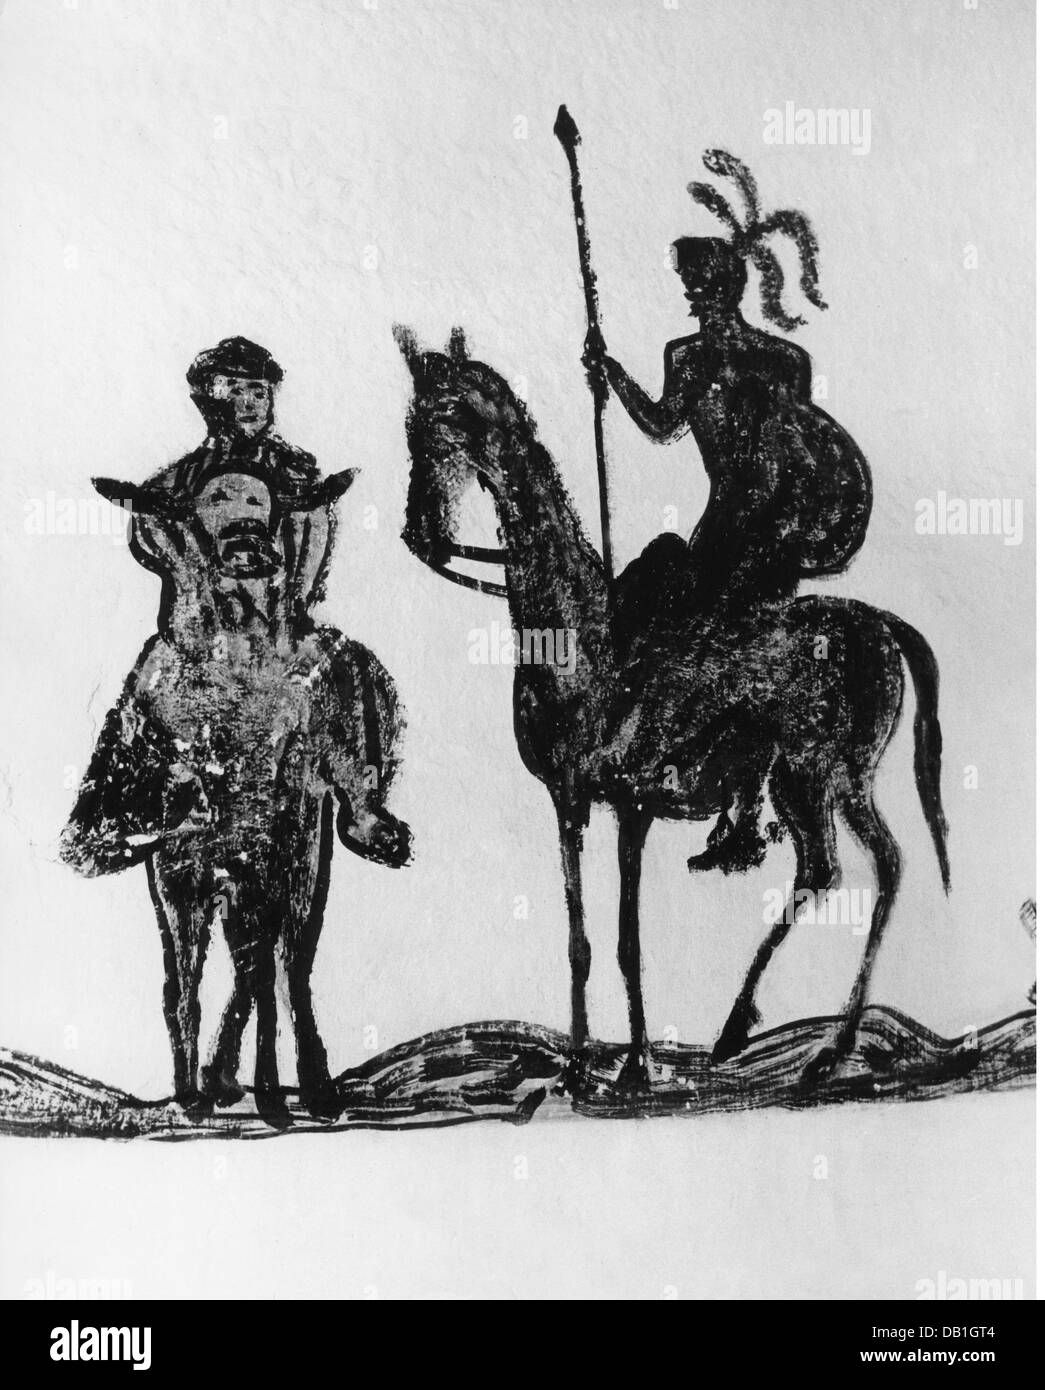 literature, Don Quixote, Sancho Pansa and Don Quixote, drawing on exterior wall, Puerto Lapice, Spain, graffito, Miguel de Cervantes Saavedra, rider, riders, riding, donkey, donkeys, horse, horses, squire, knight's attendant, squires, knight's attendants, knight, knights, lance, lances, historic, historical, man, men, male, 1980s, 20th century, people, Additional-Rights-Clearences-Not Available Stock Photo